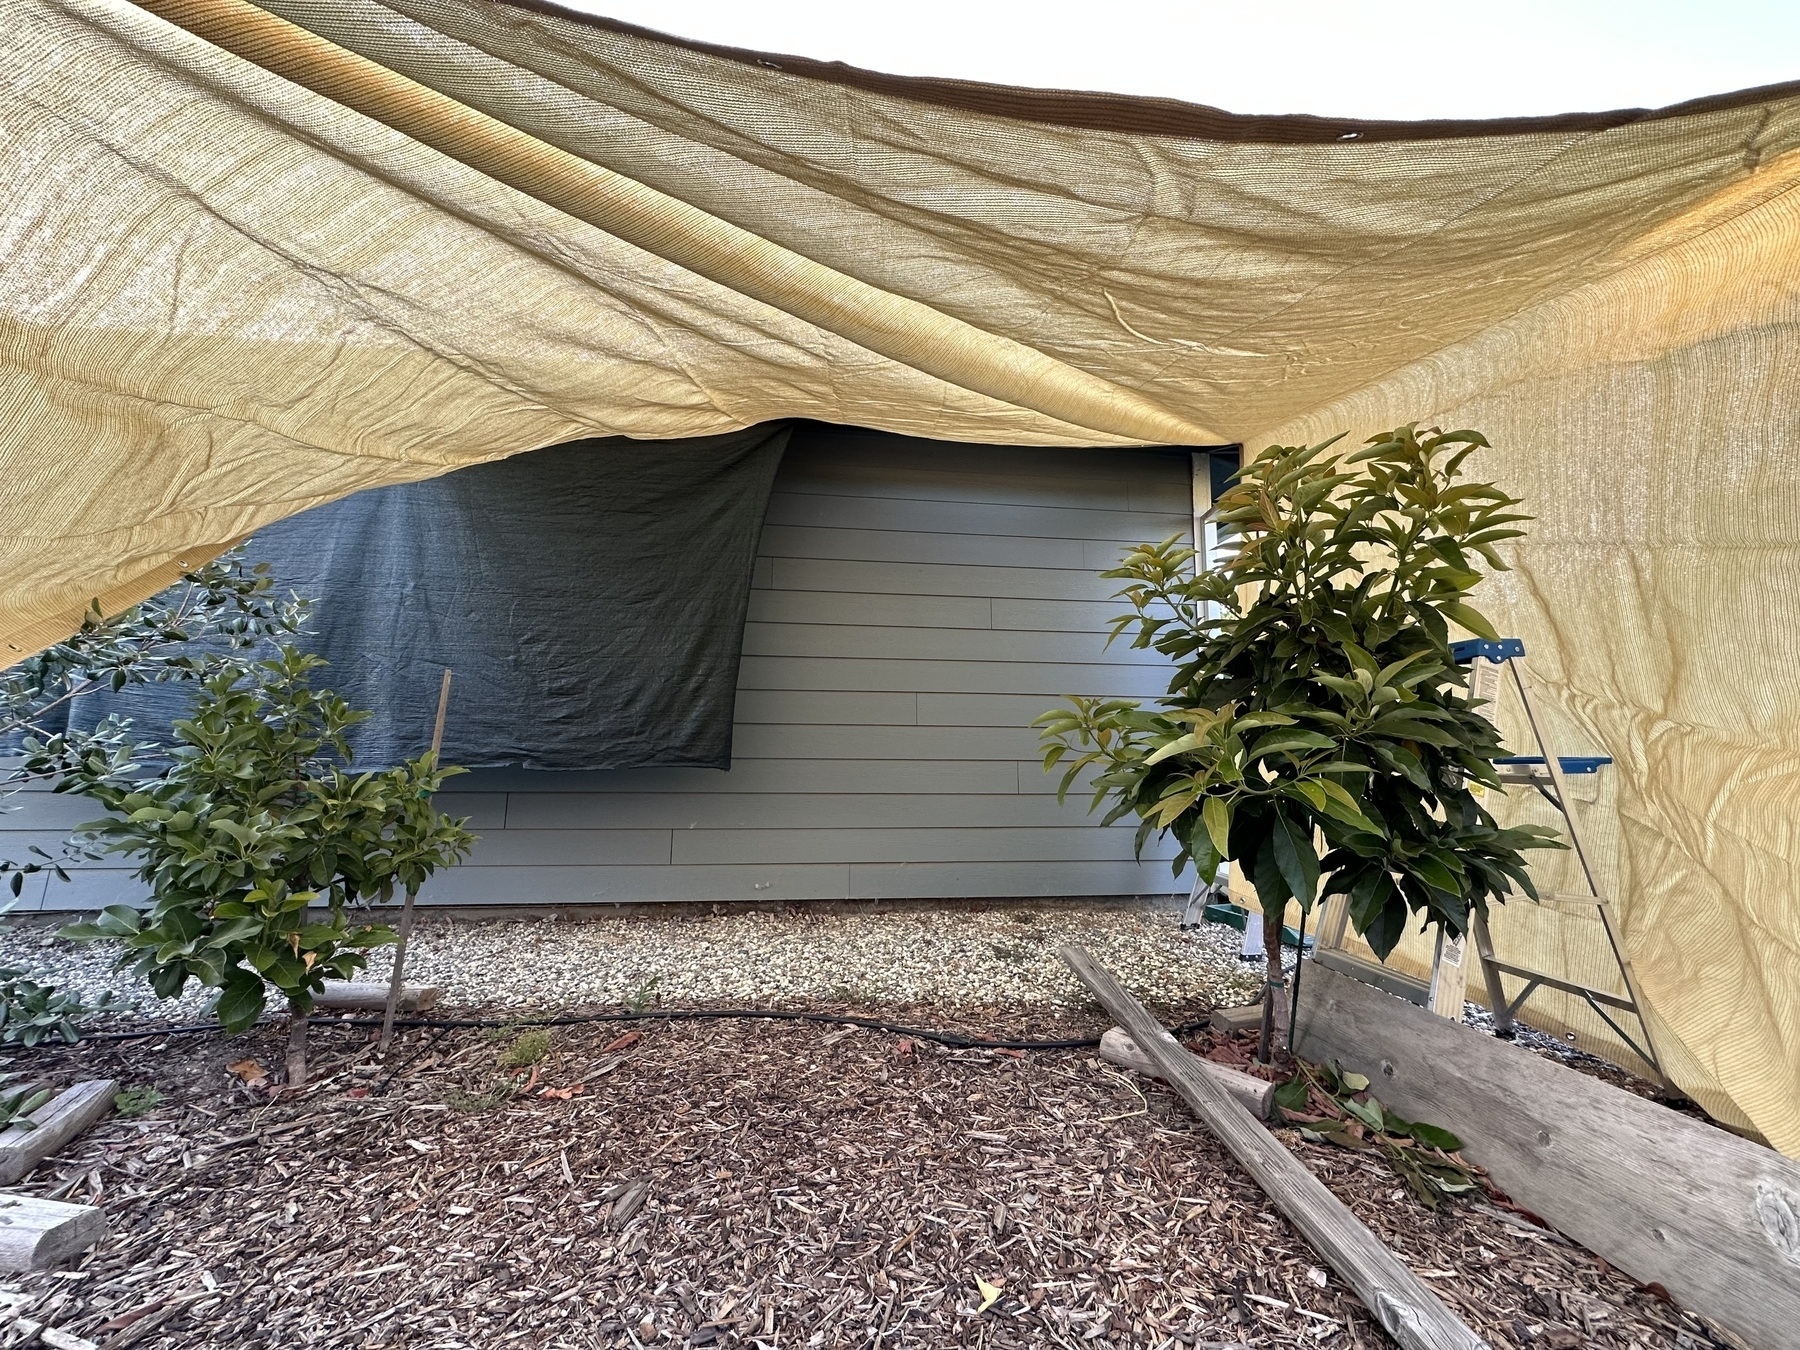 Tan shade cloth draped over a side yard with broad leaf trees. A house’s siding can be seen.